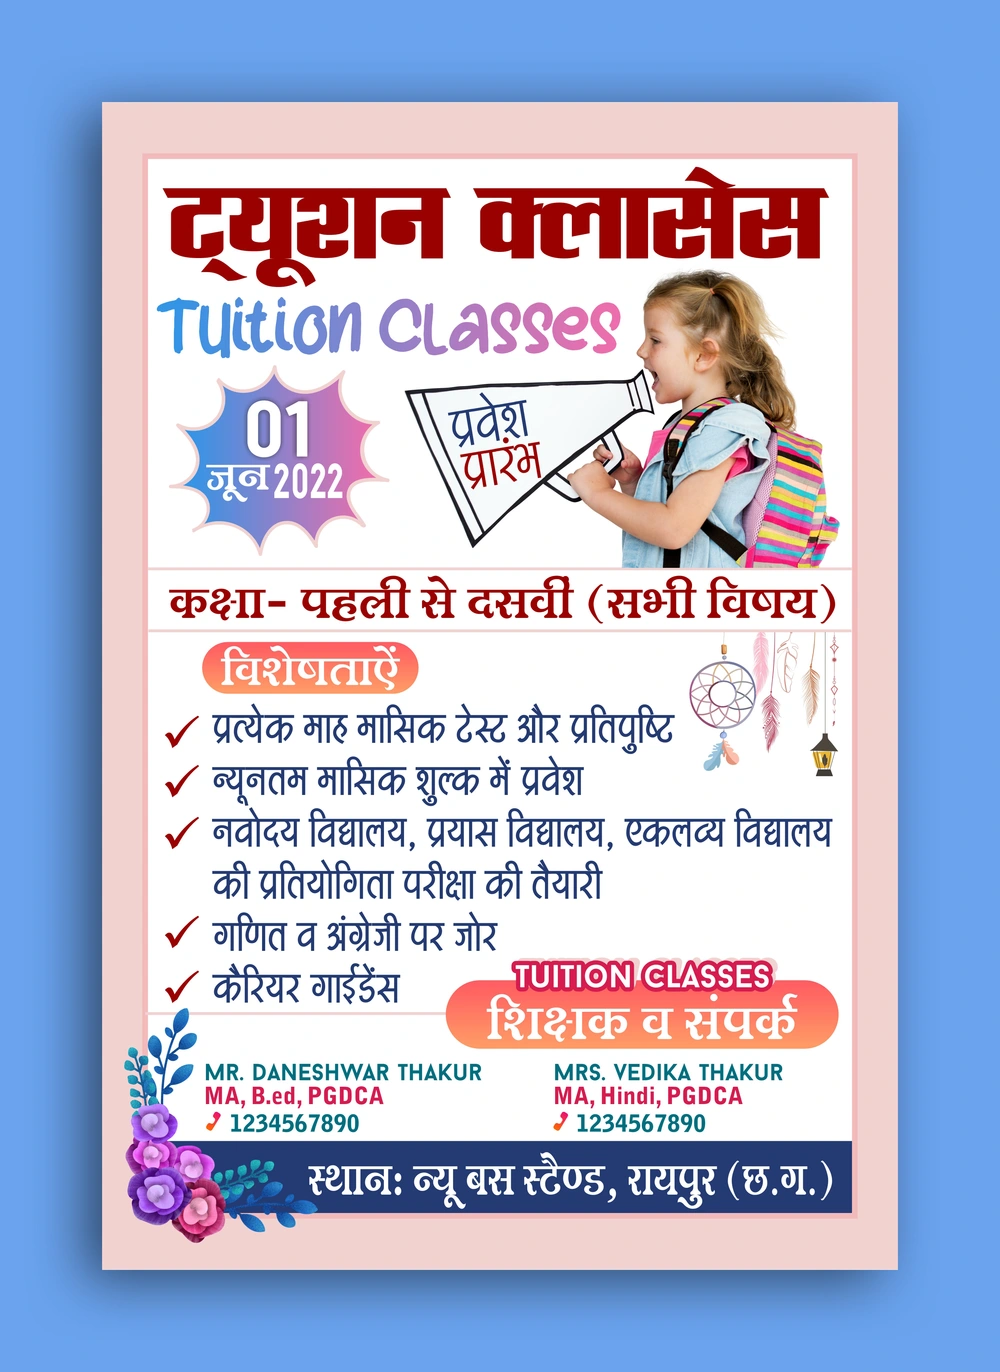 Tution classes flyer template in Hindi cdr file free download 030622